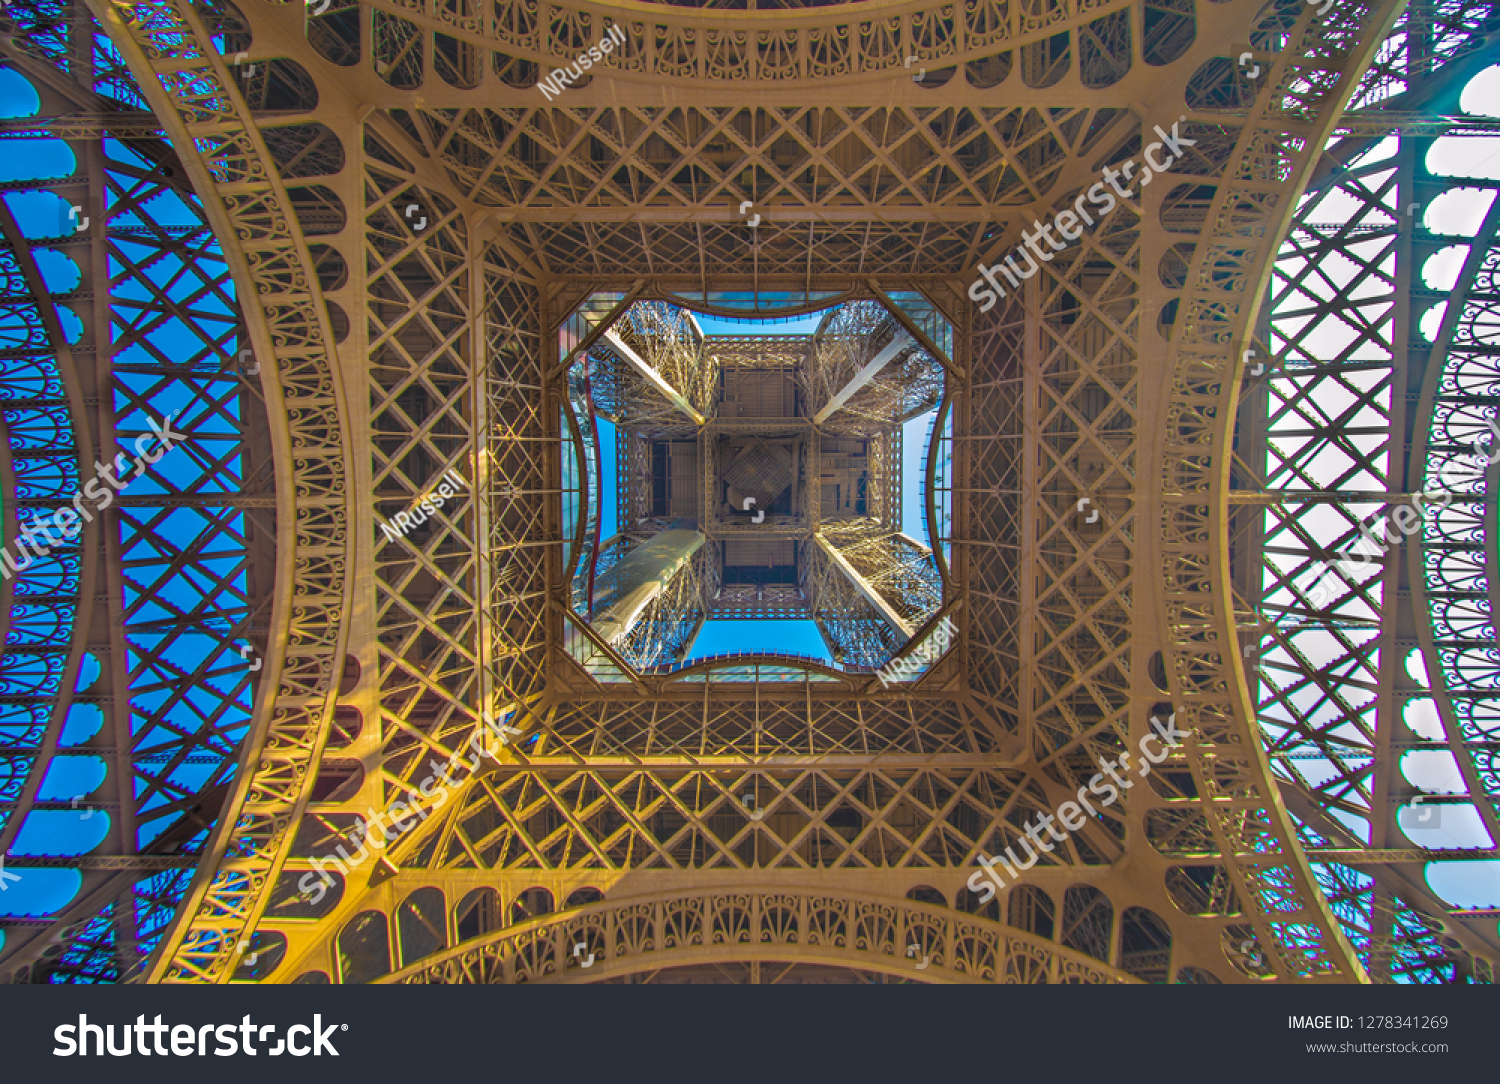 A perspective of the beloved Eiffel tower of Paris France in all its glory and wonder. A landmark that can not be topped by both its history beauty and structural complexity. A art piece for the ages. #1278341269